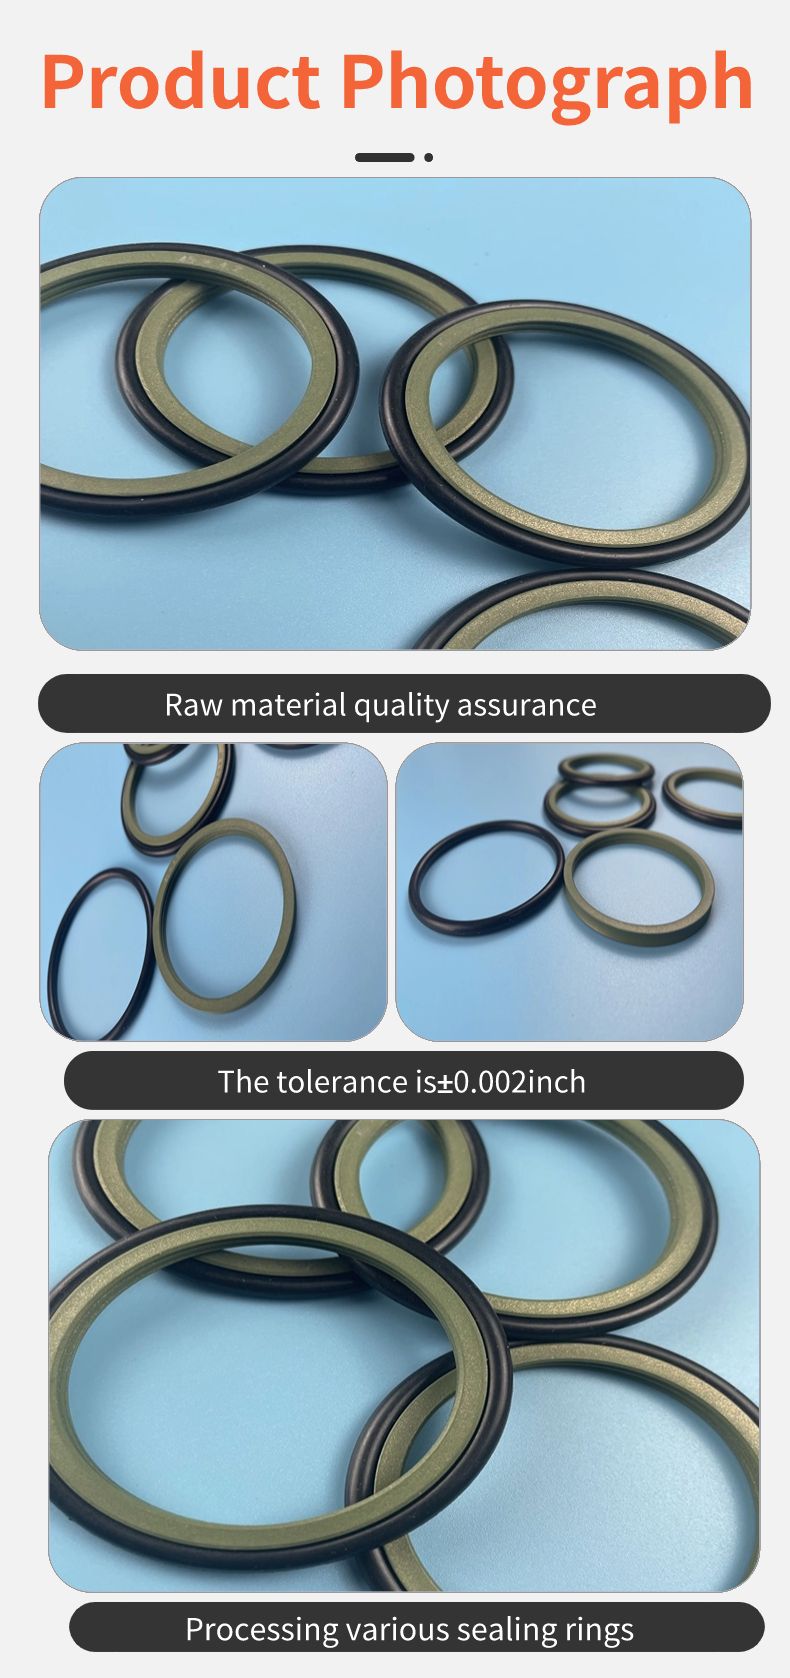 O-ring wear-resistant parts